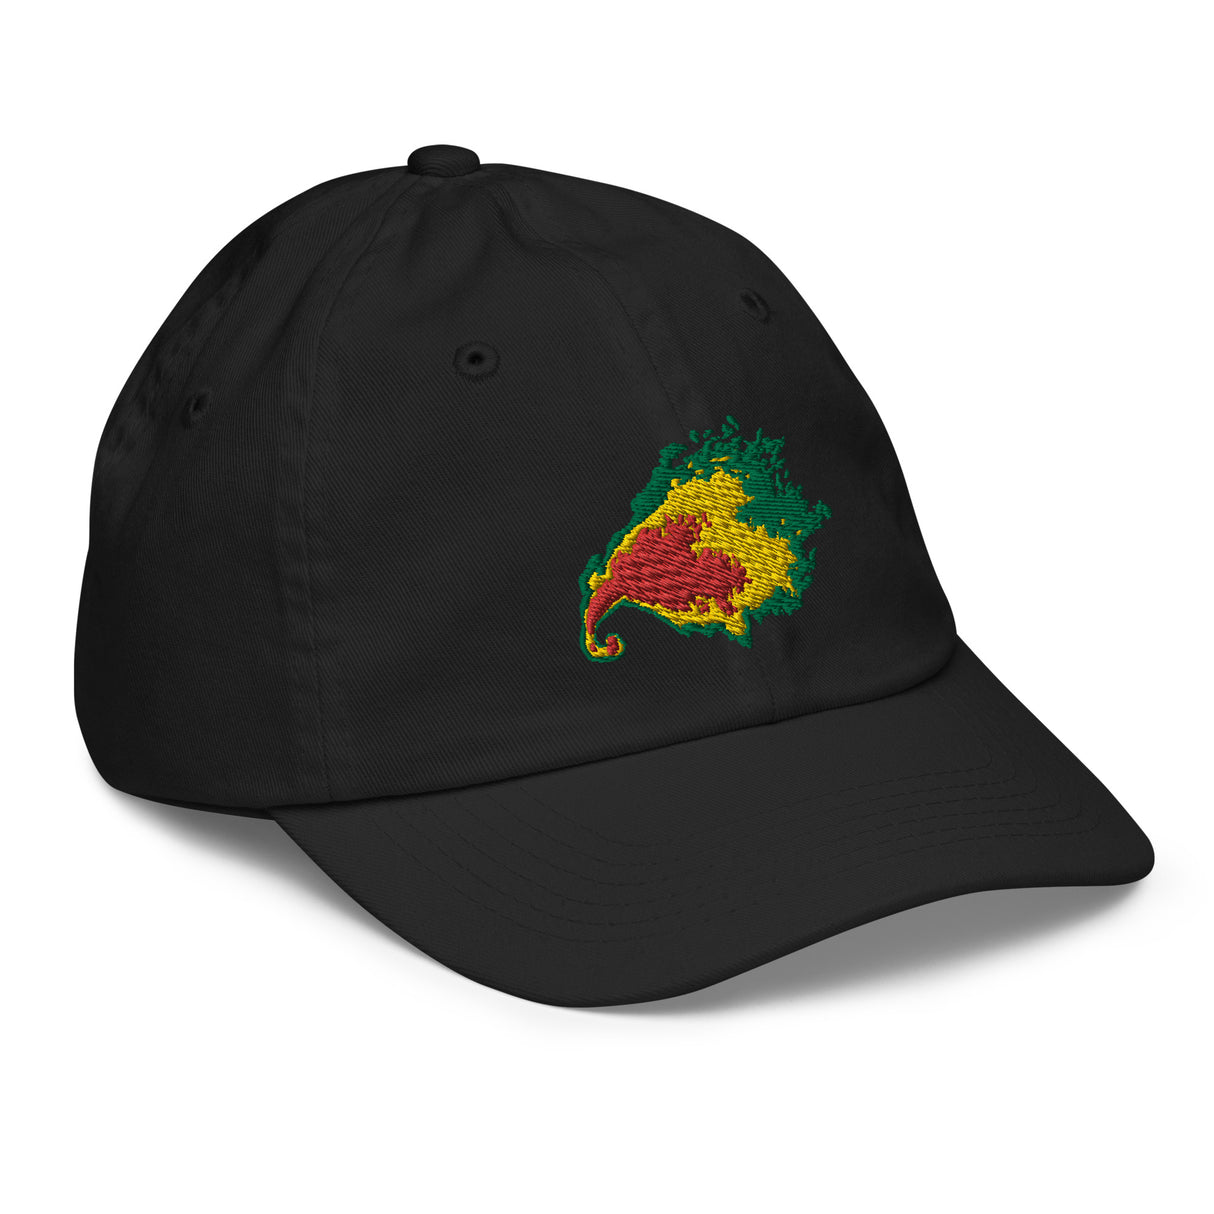 Supercell - Youth Baseball Cap